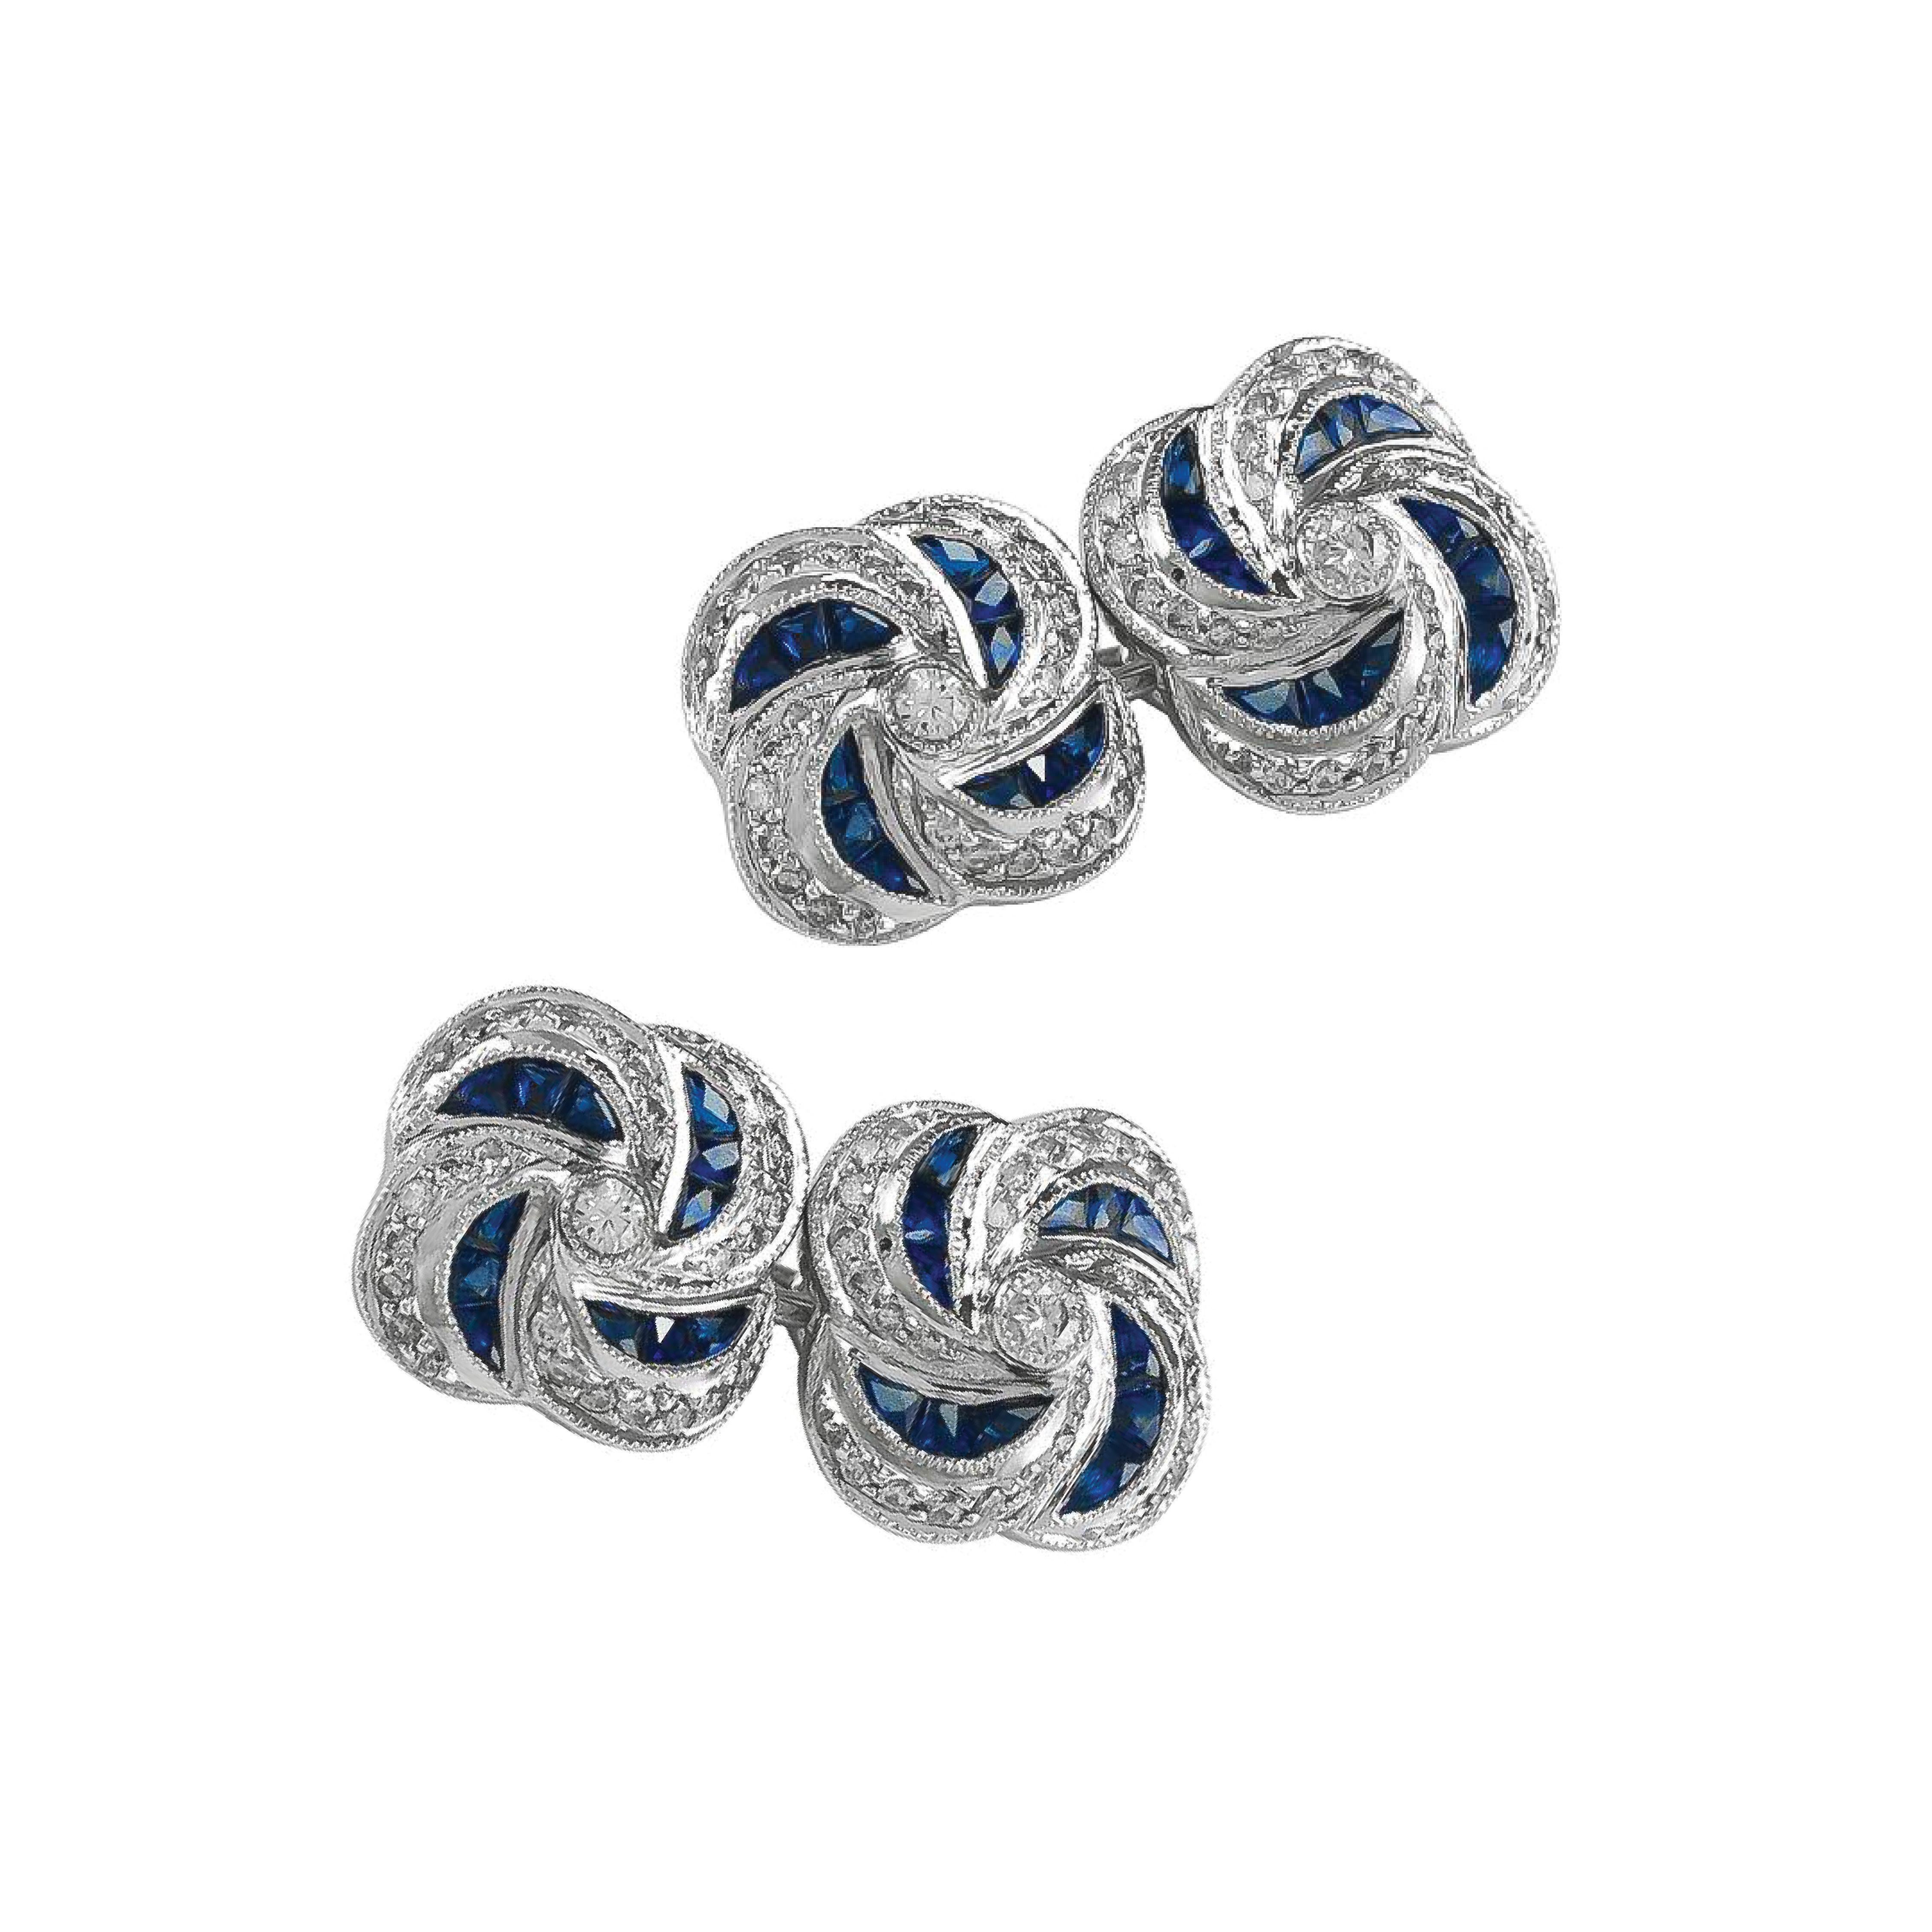 Platinum Set Cufflinks with blue sapphires weighing 2.19 carats and diamonds weighting 1.02 carats.

Sophia D by Joseph Dardashti LTD has been known worldwide for 35 years and are inspired by classic Art Deco design that merges with modern